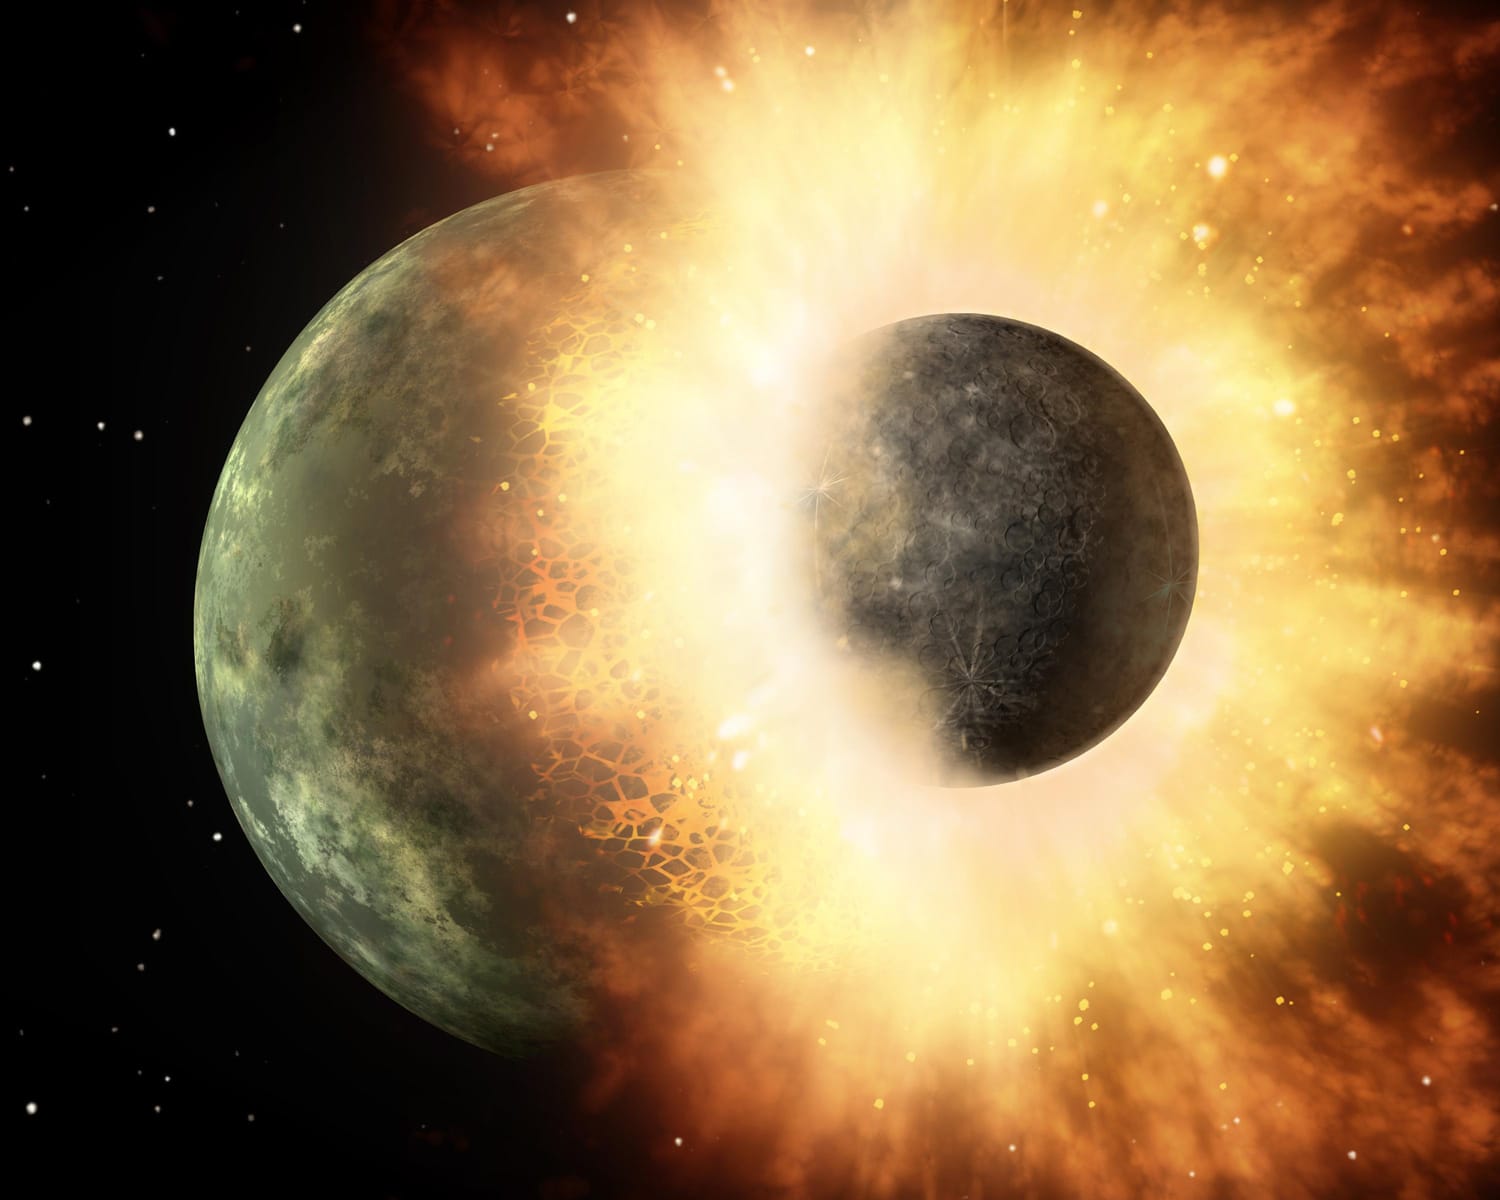 Remnants of the impact that formed the Moon may be buried deep within the Earth